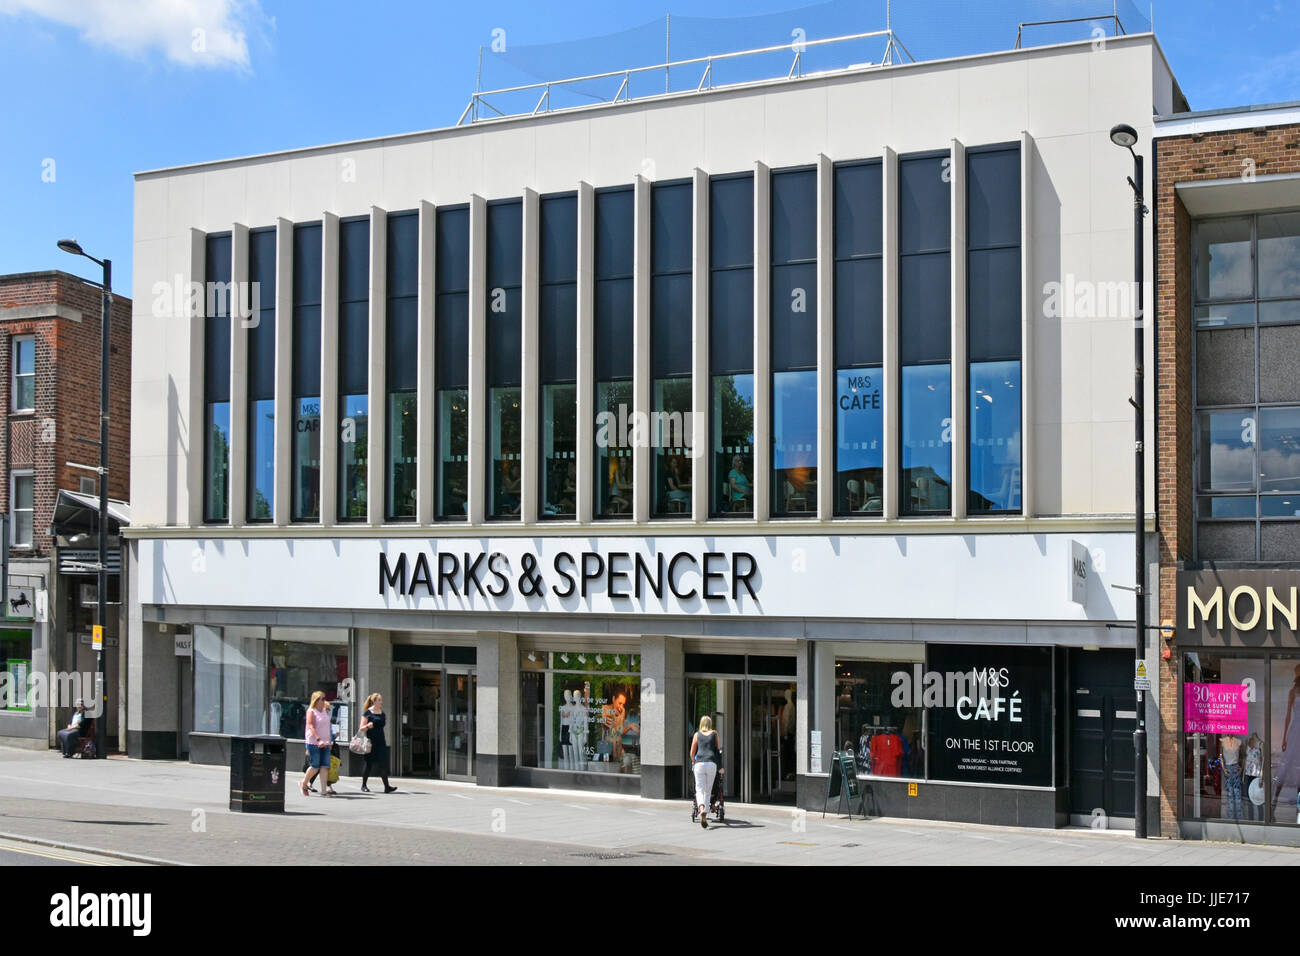 Marks and Spencer high street store refurbished front facade & interior improvement new upper sales floor with cafe Brentwood, Essex, England,UK Stock Photo